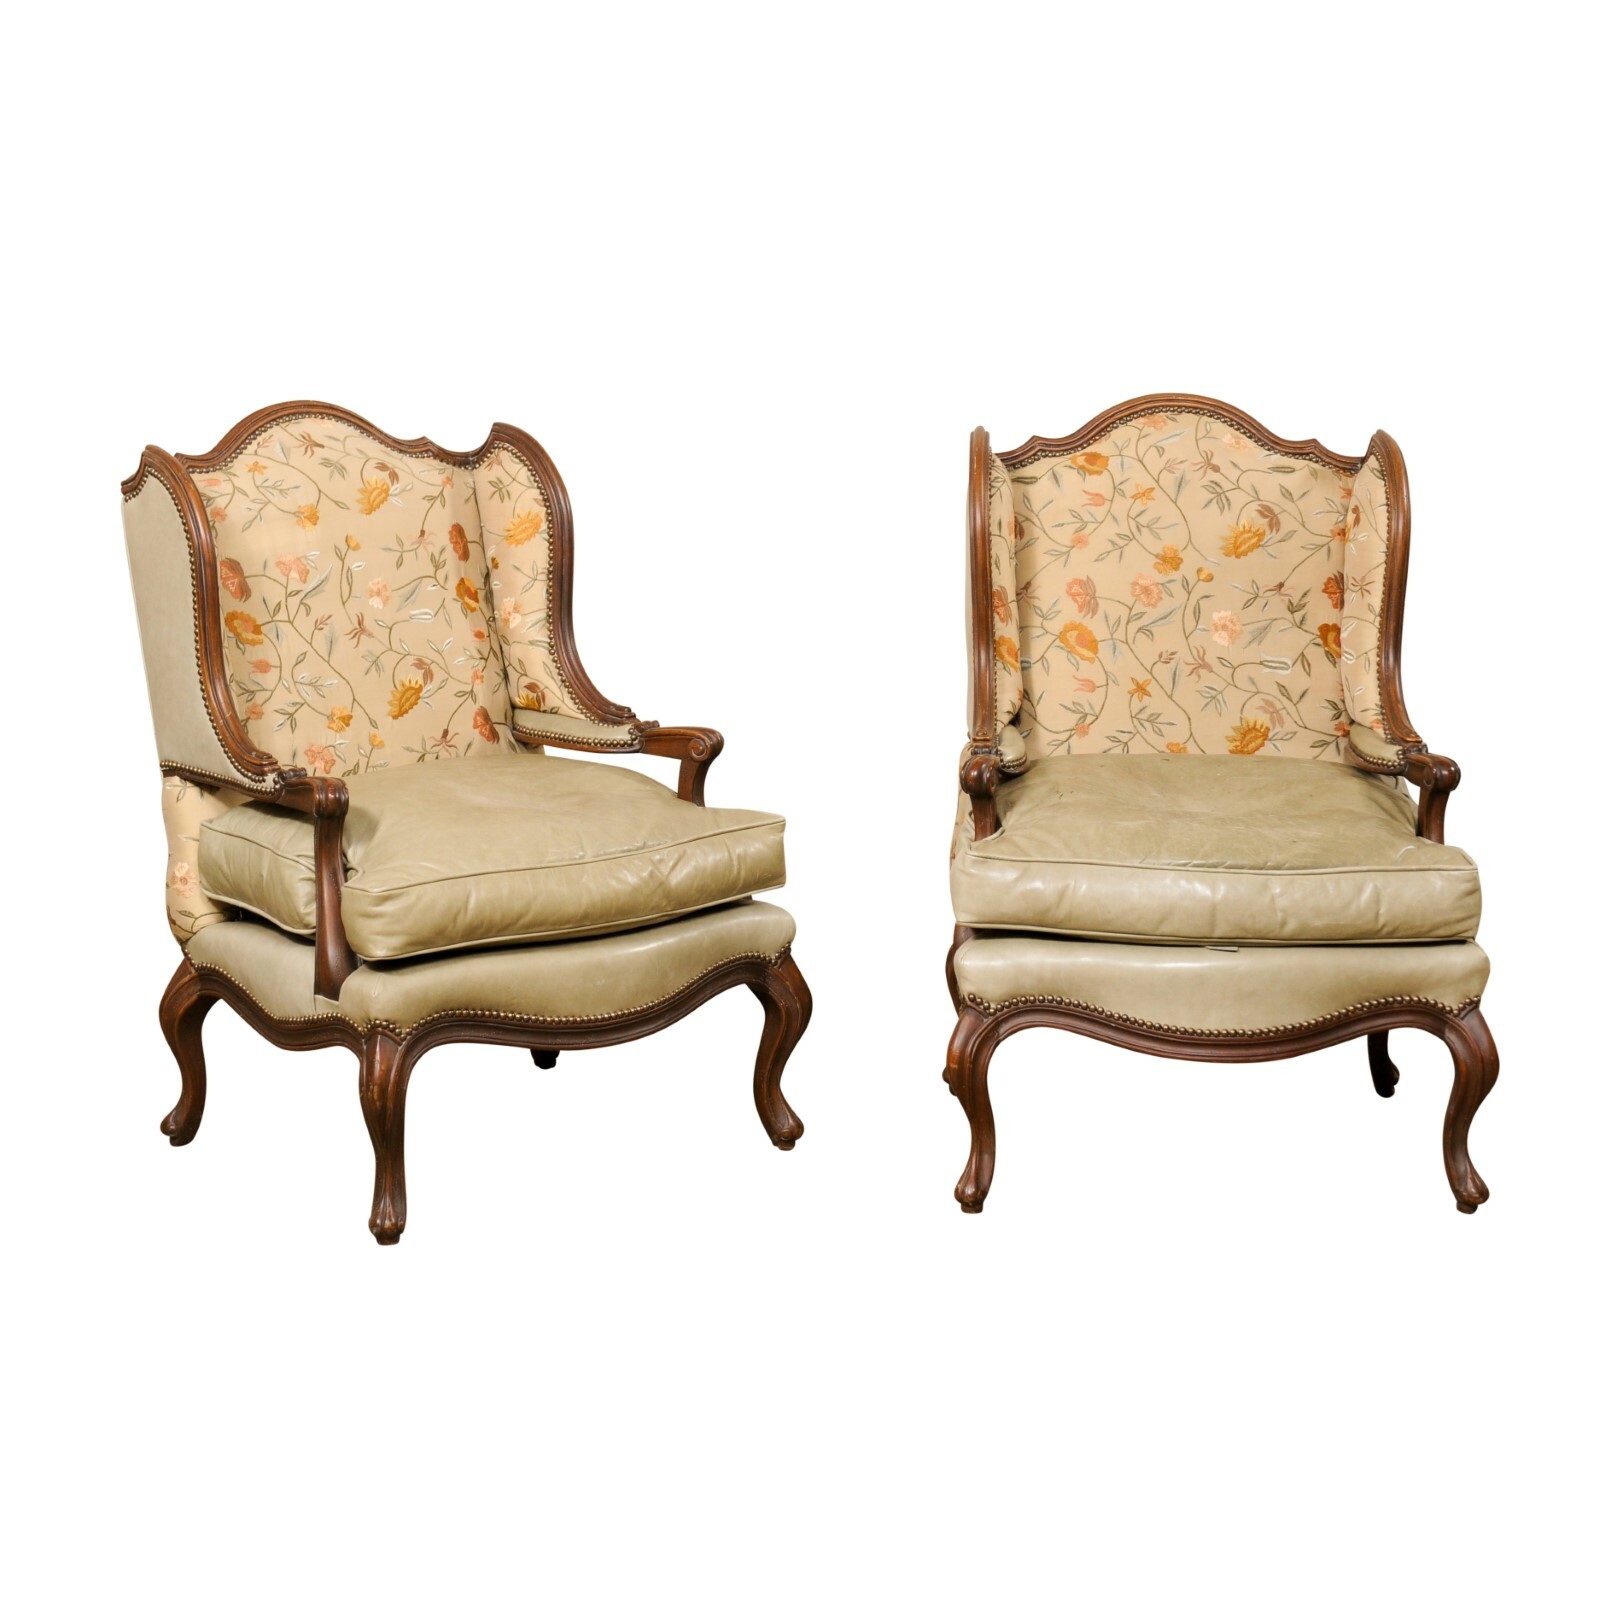 Pair Nice-Size Wing-Back Chairs, Mid 20th C